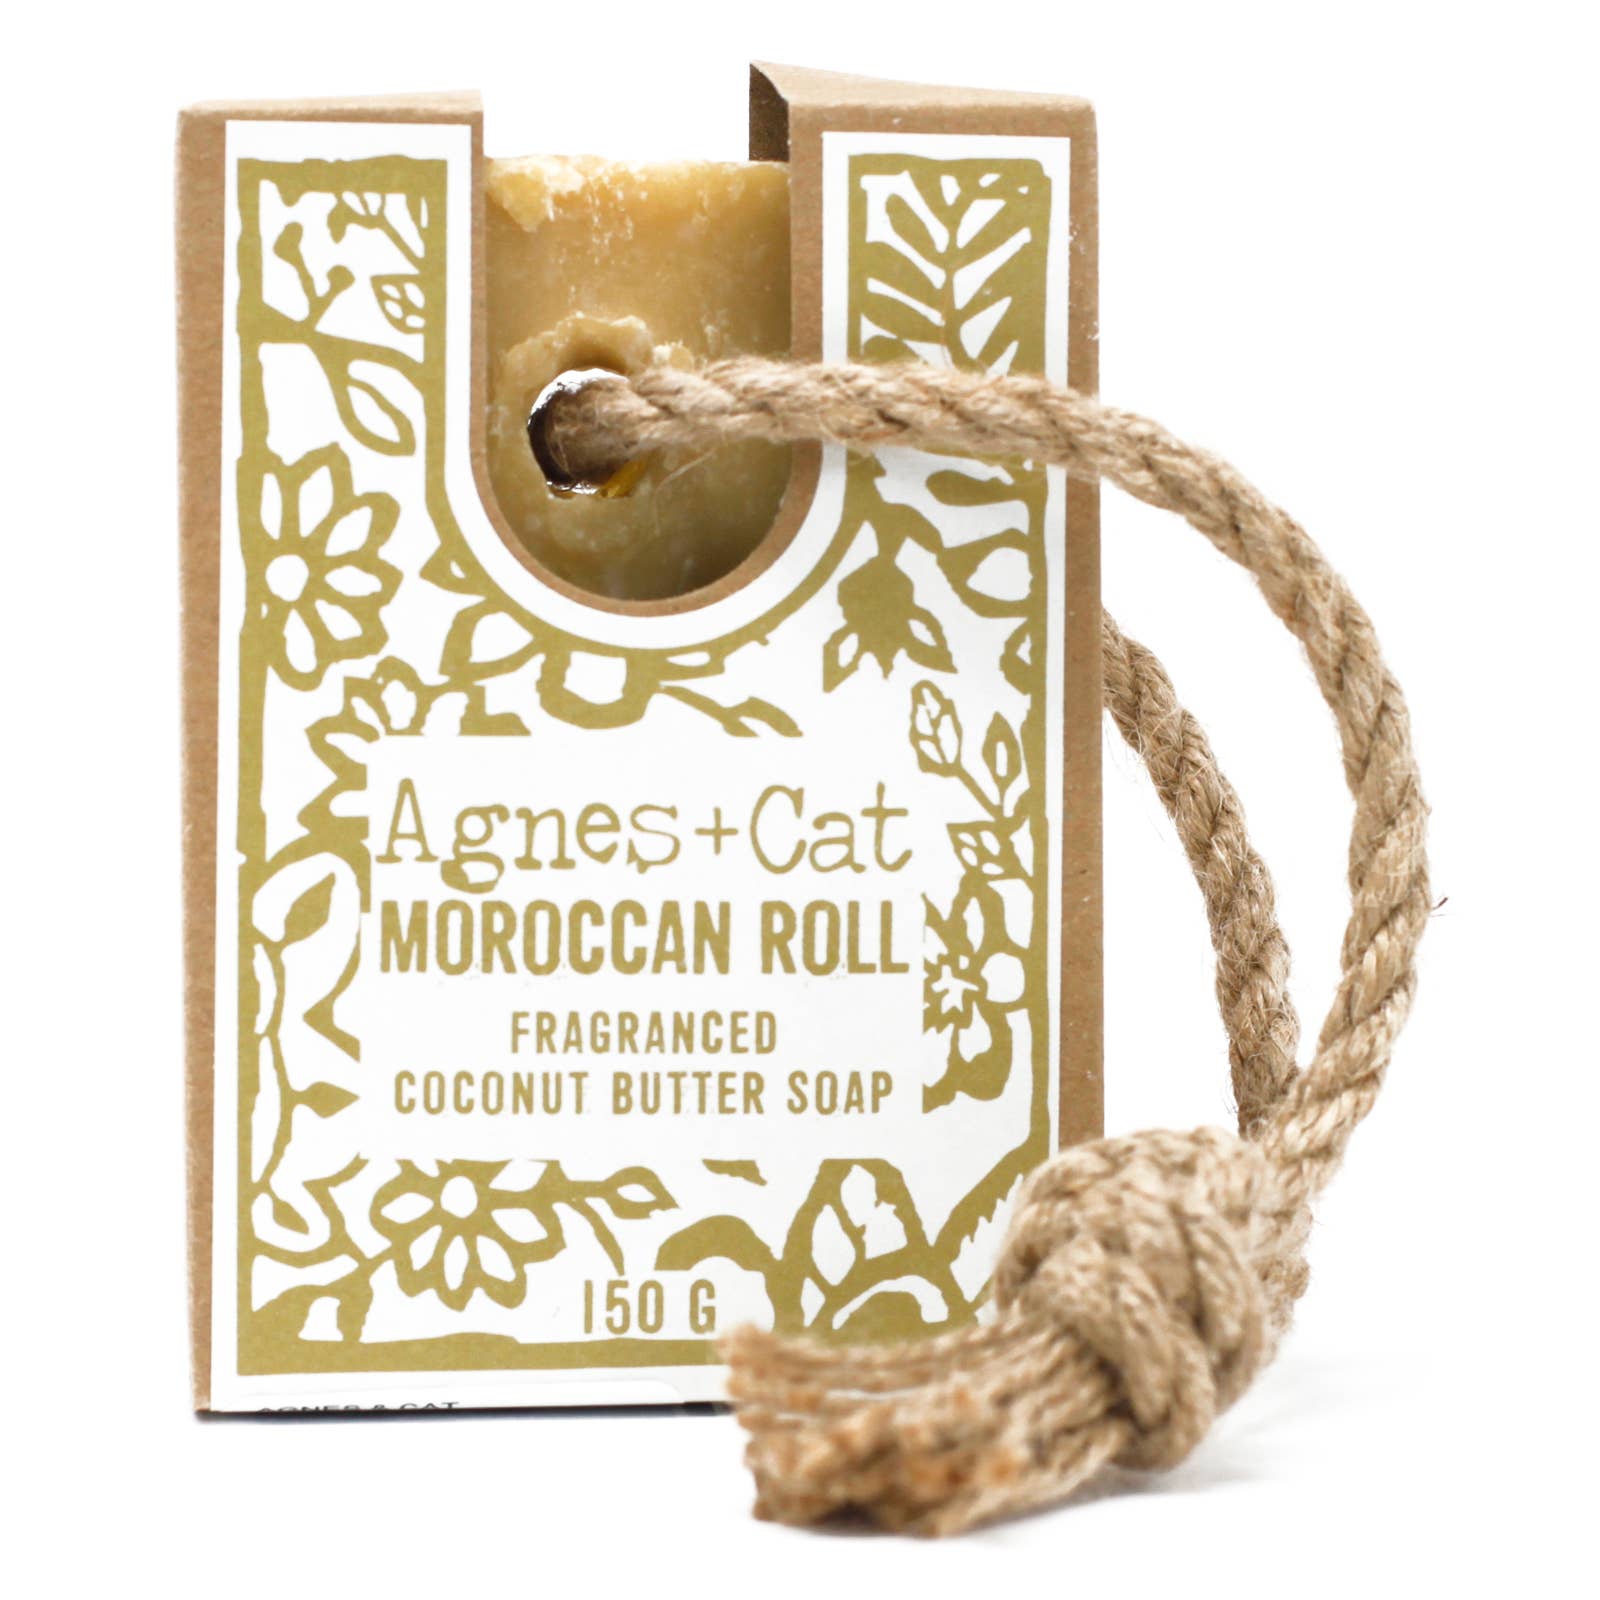 Moroccan Roll soap on a rope